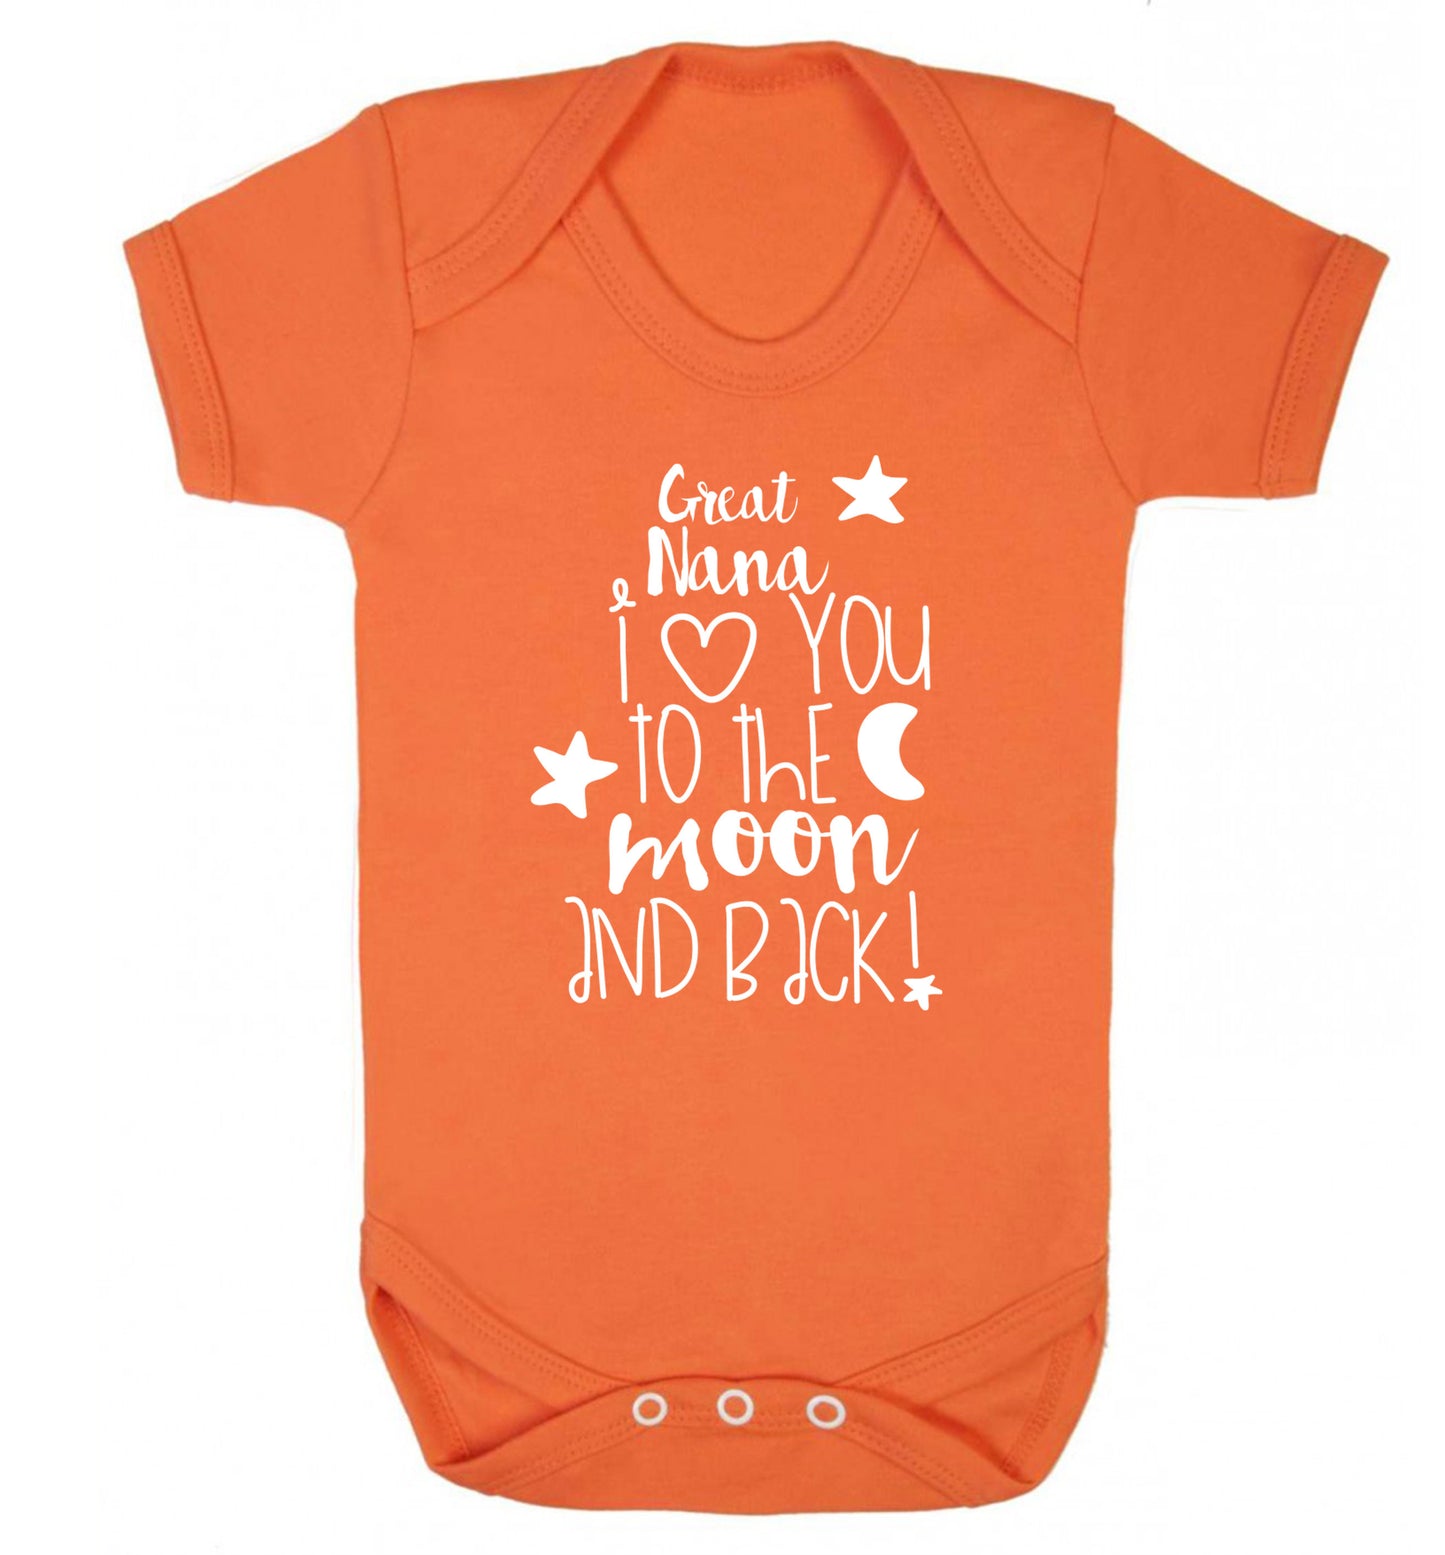 Great Nana I love you to the moon and back Baby Vest orange 18-24 months